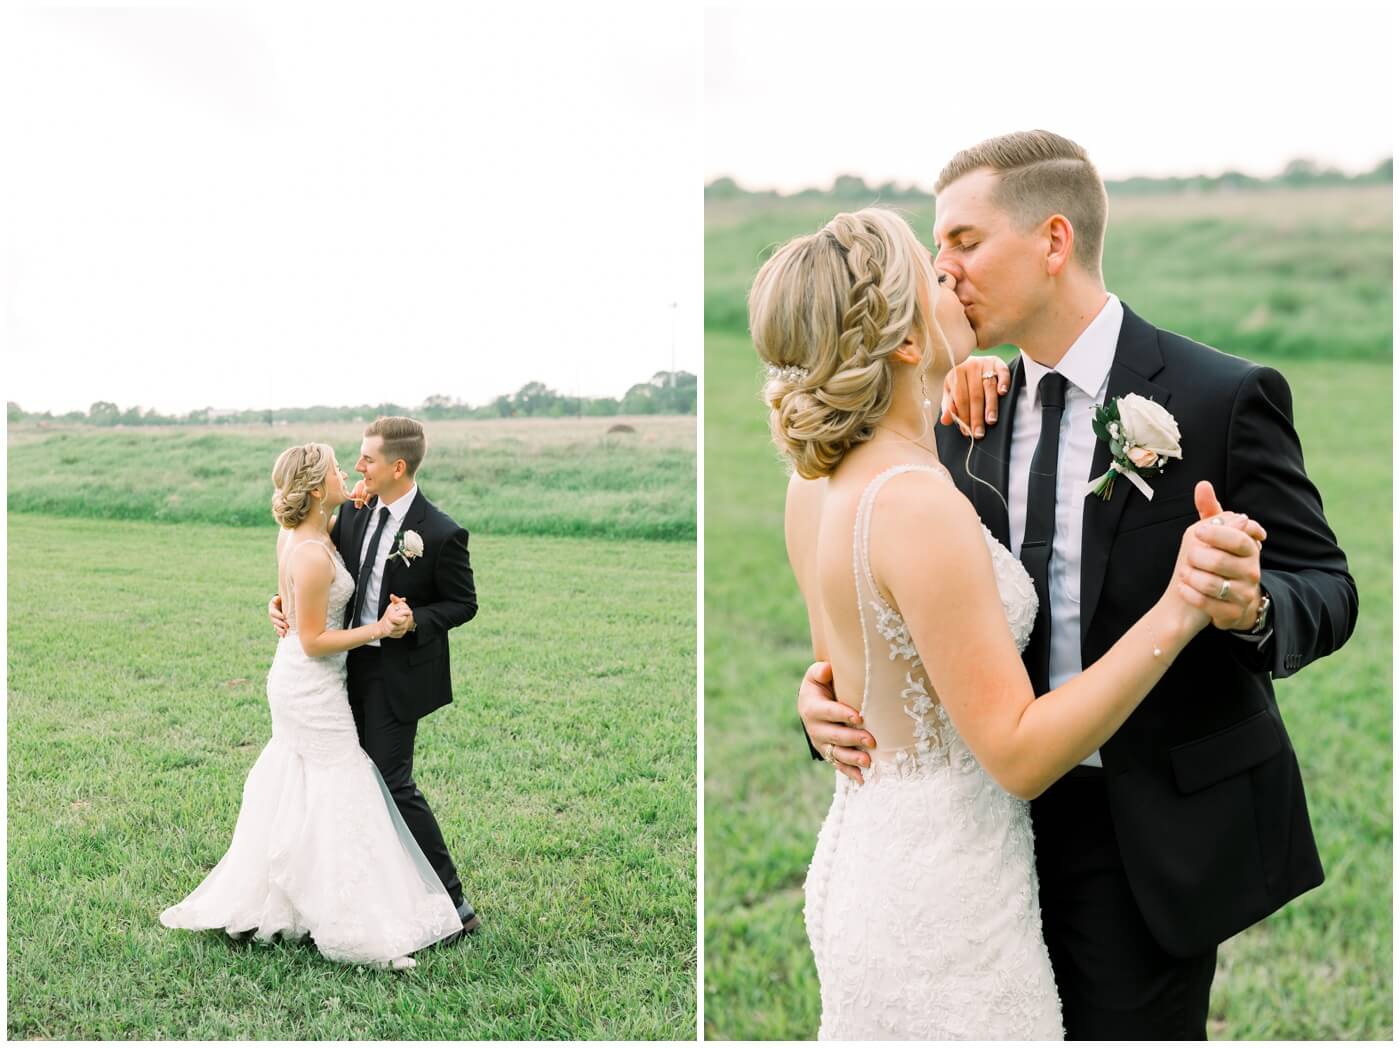 Beckendorff Farms | The couple dances together on their wedding day